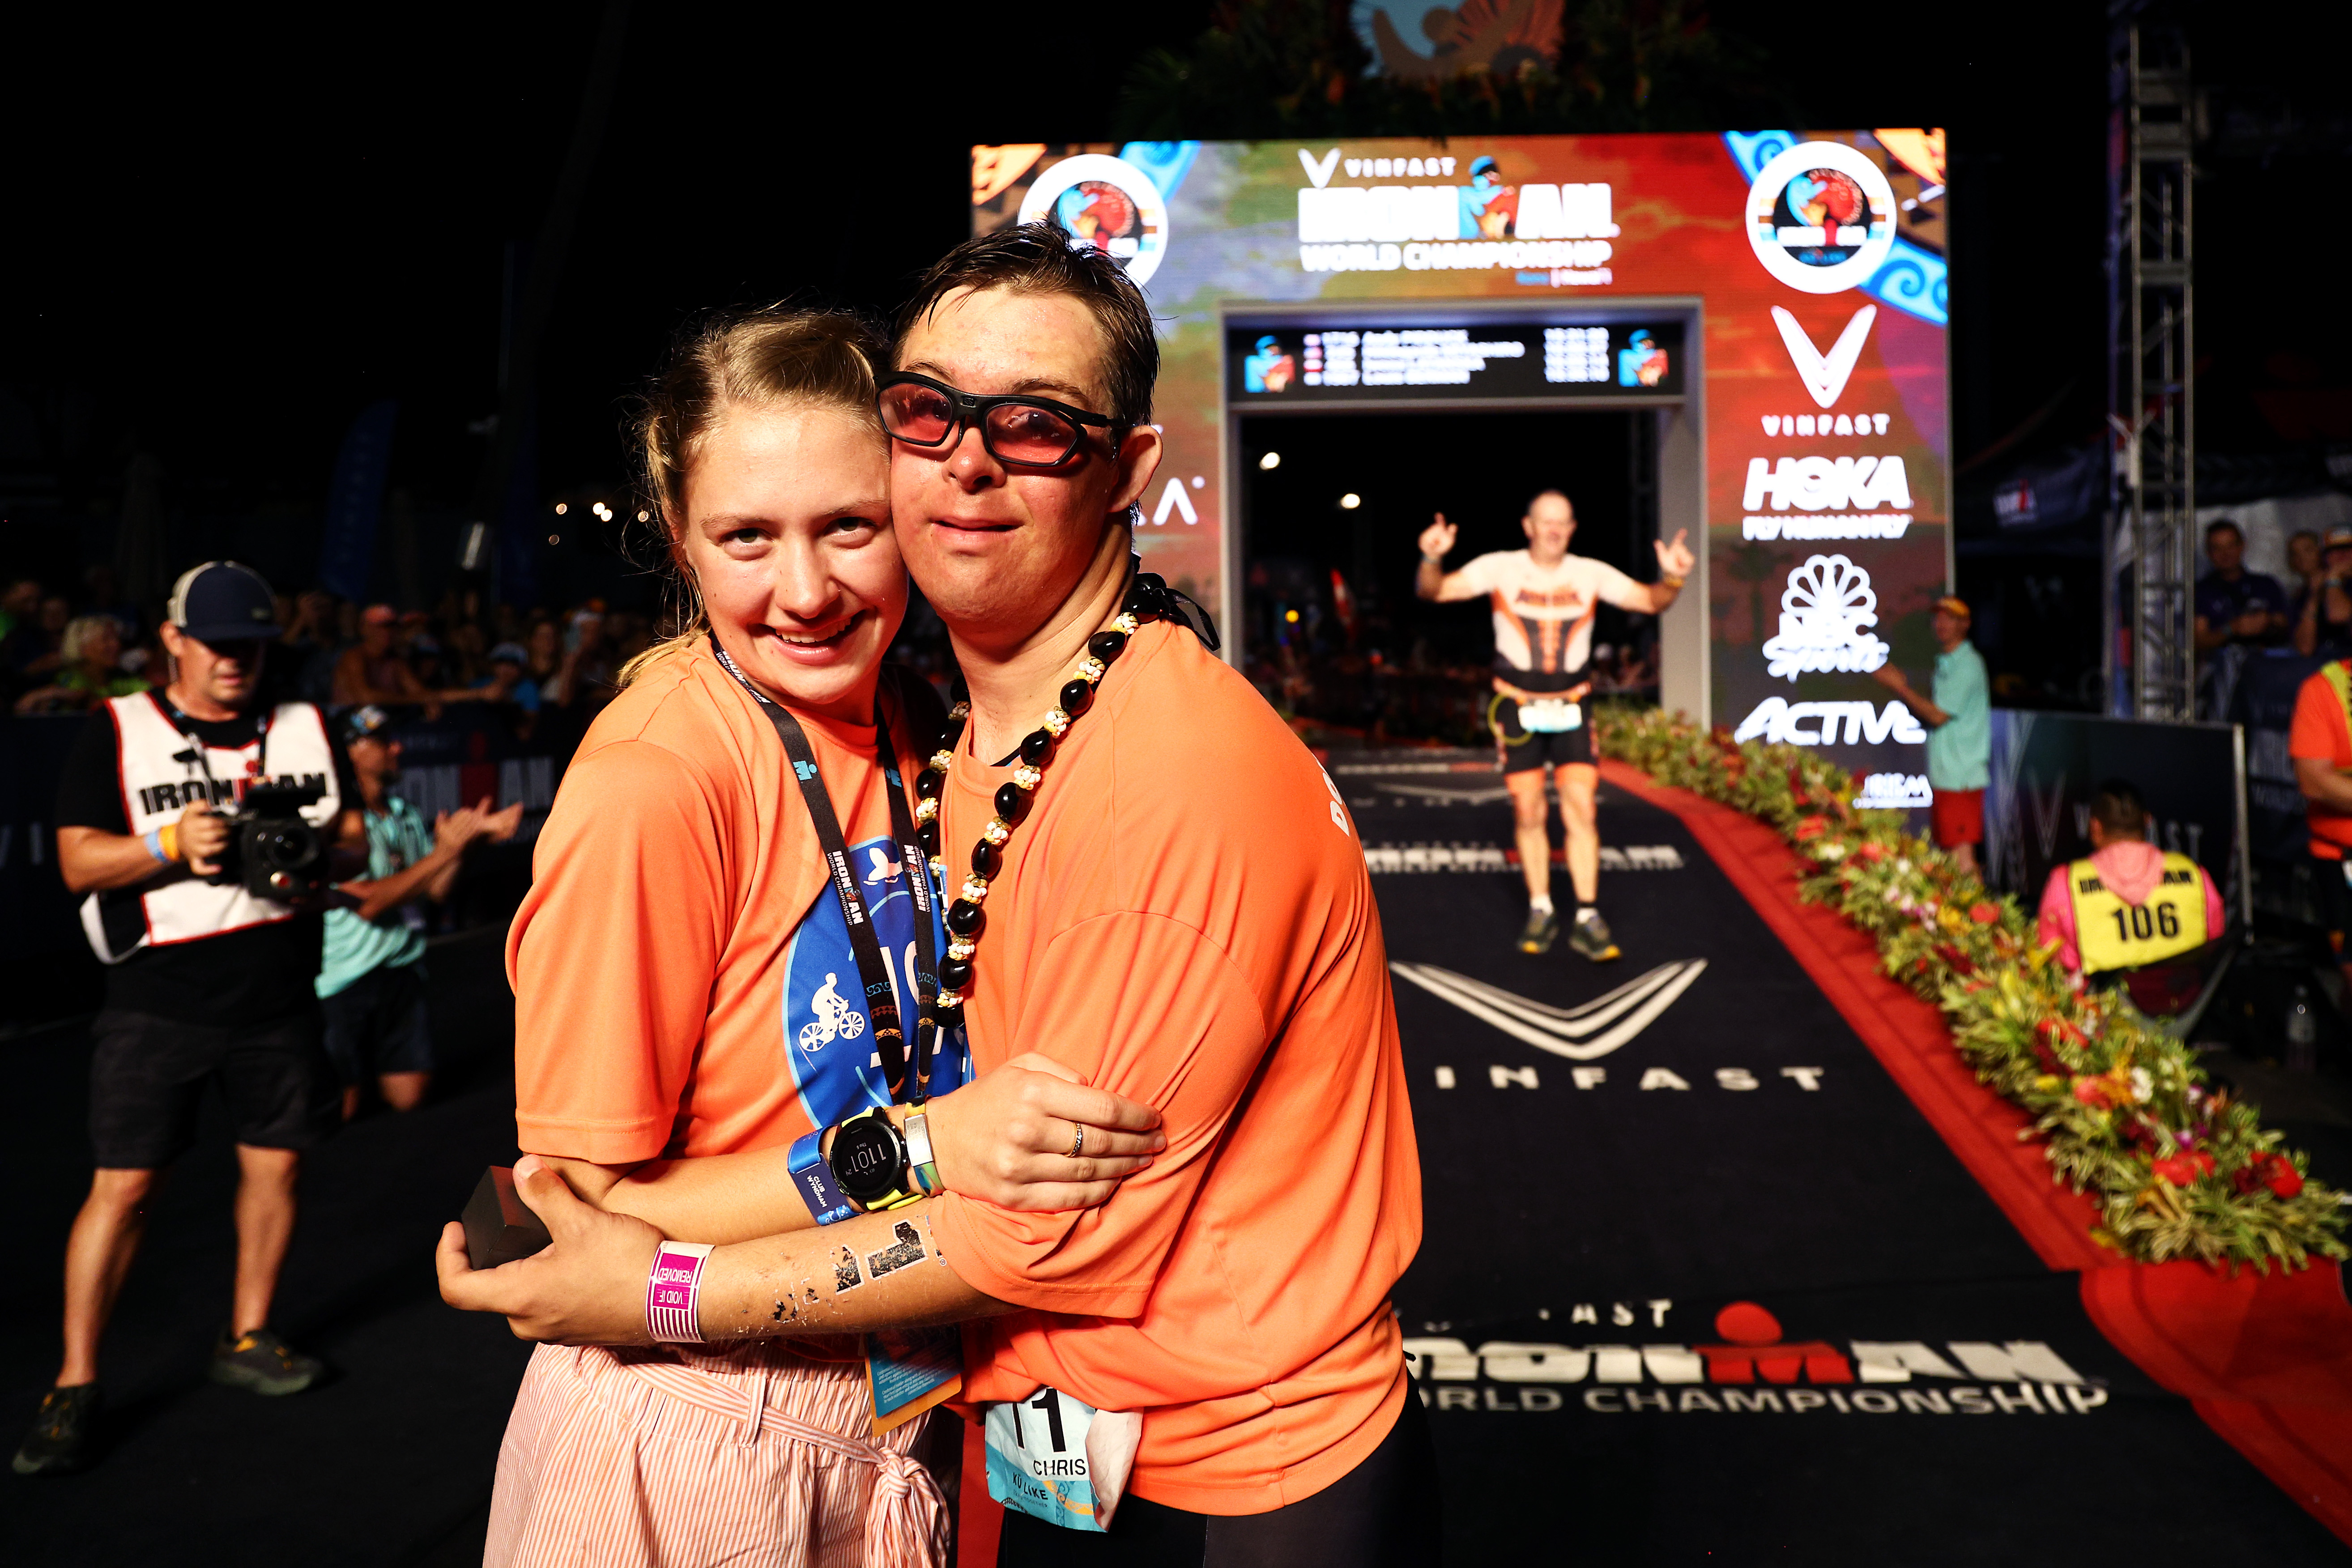 Chris Nikic the first triathlete with Downs Syndrome to complete an Ironman celebrates with his girlfriend